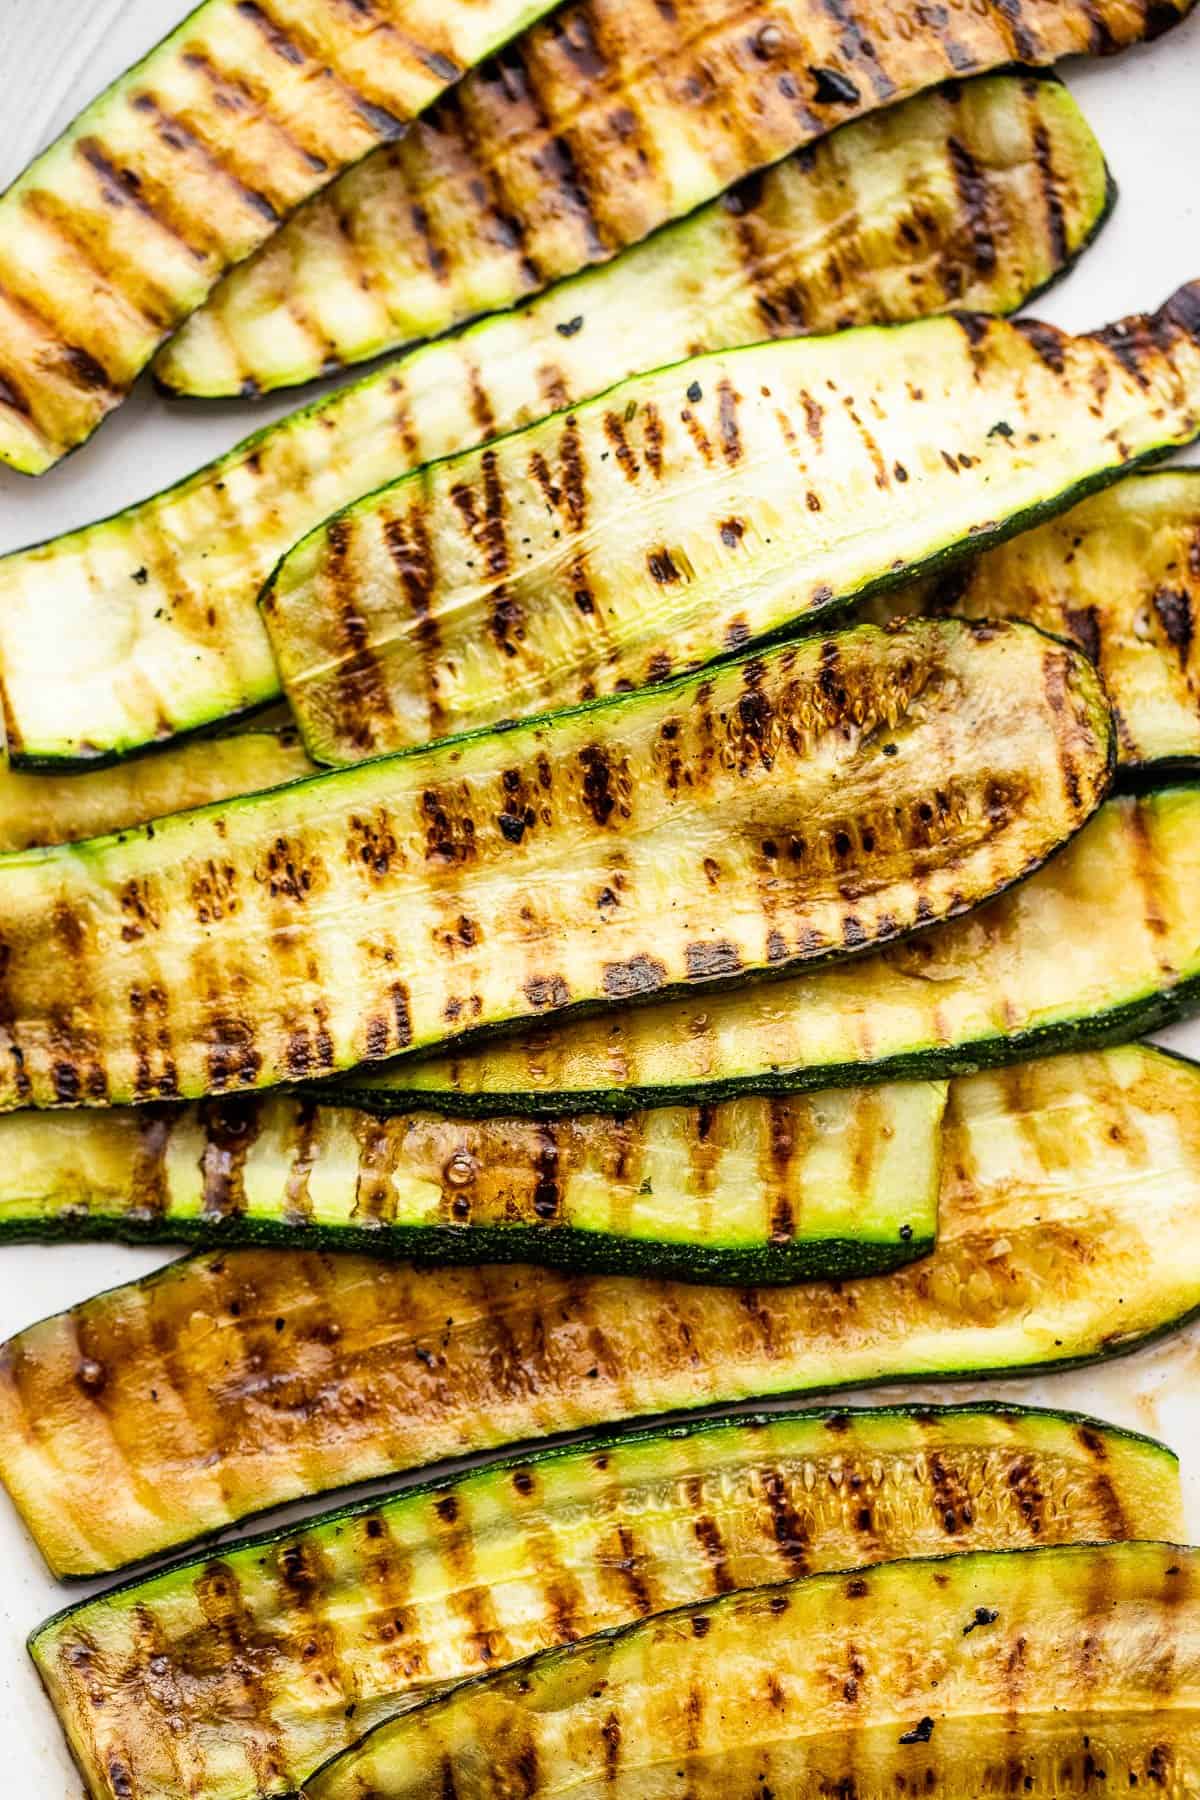 Grilled zucchini slices set on a white backdrop.